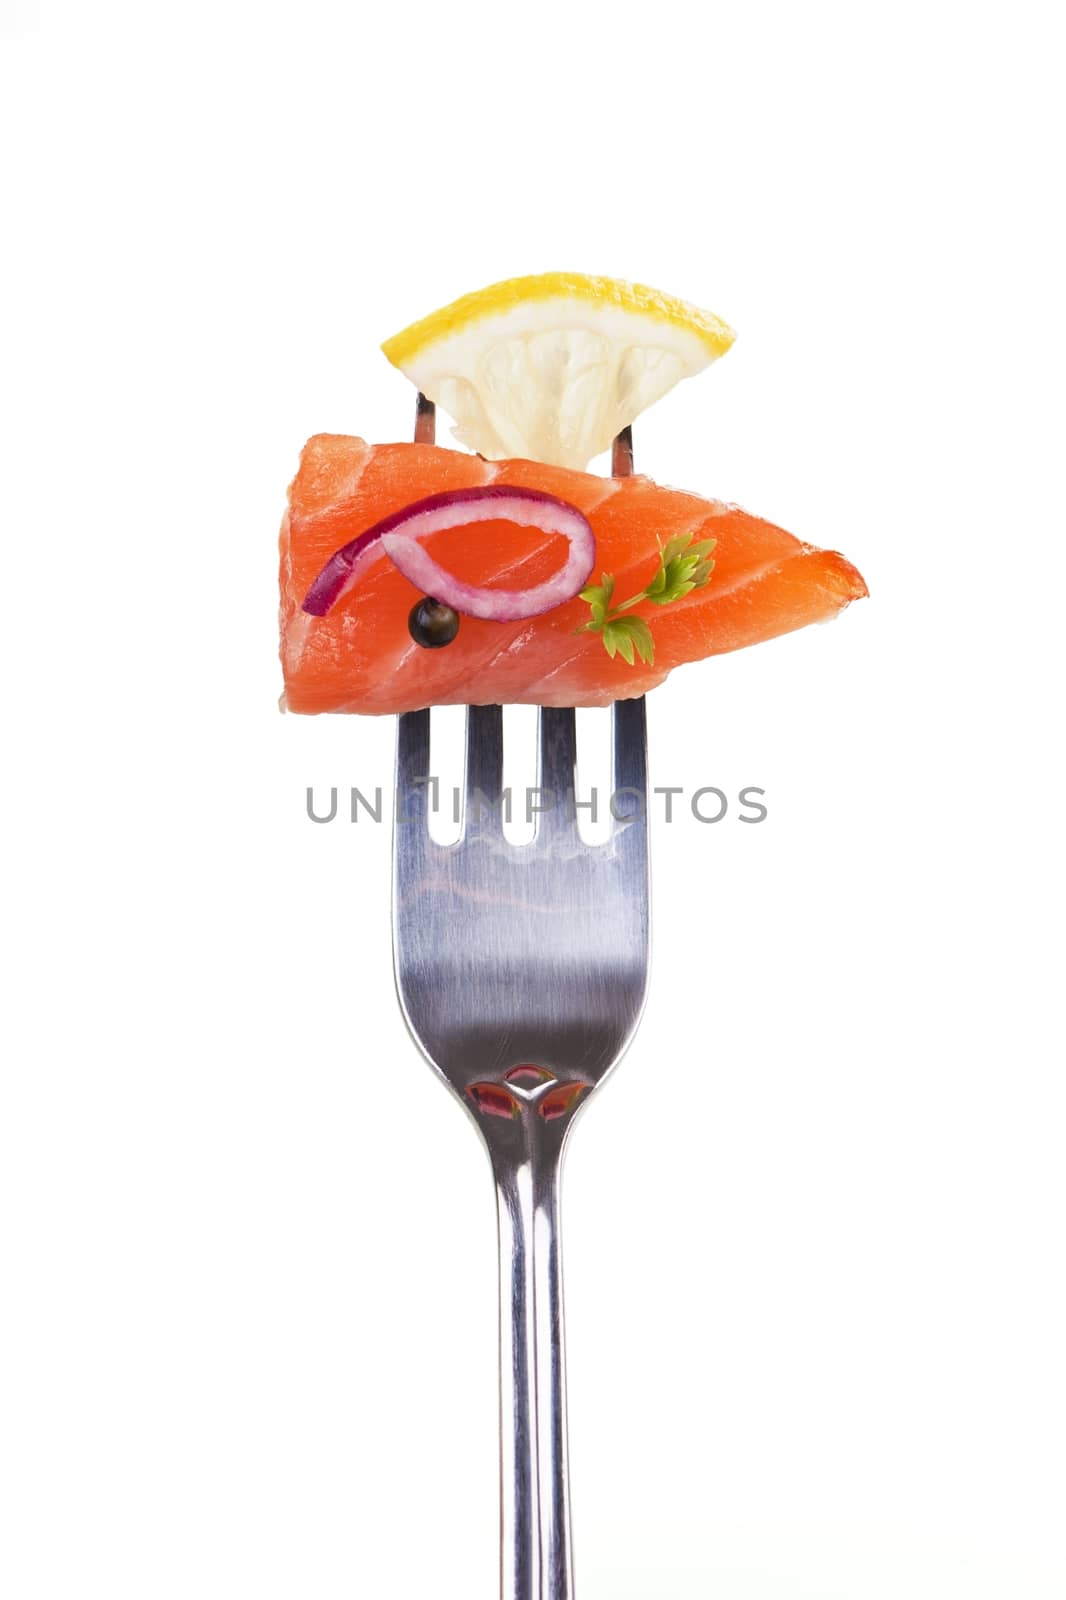 Salmon piece with lemon, onion, pepper corn and herb arranged on fork.